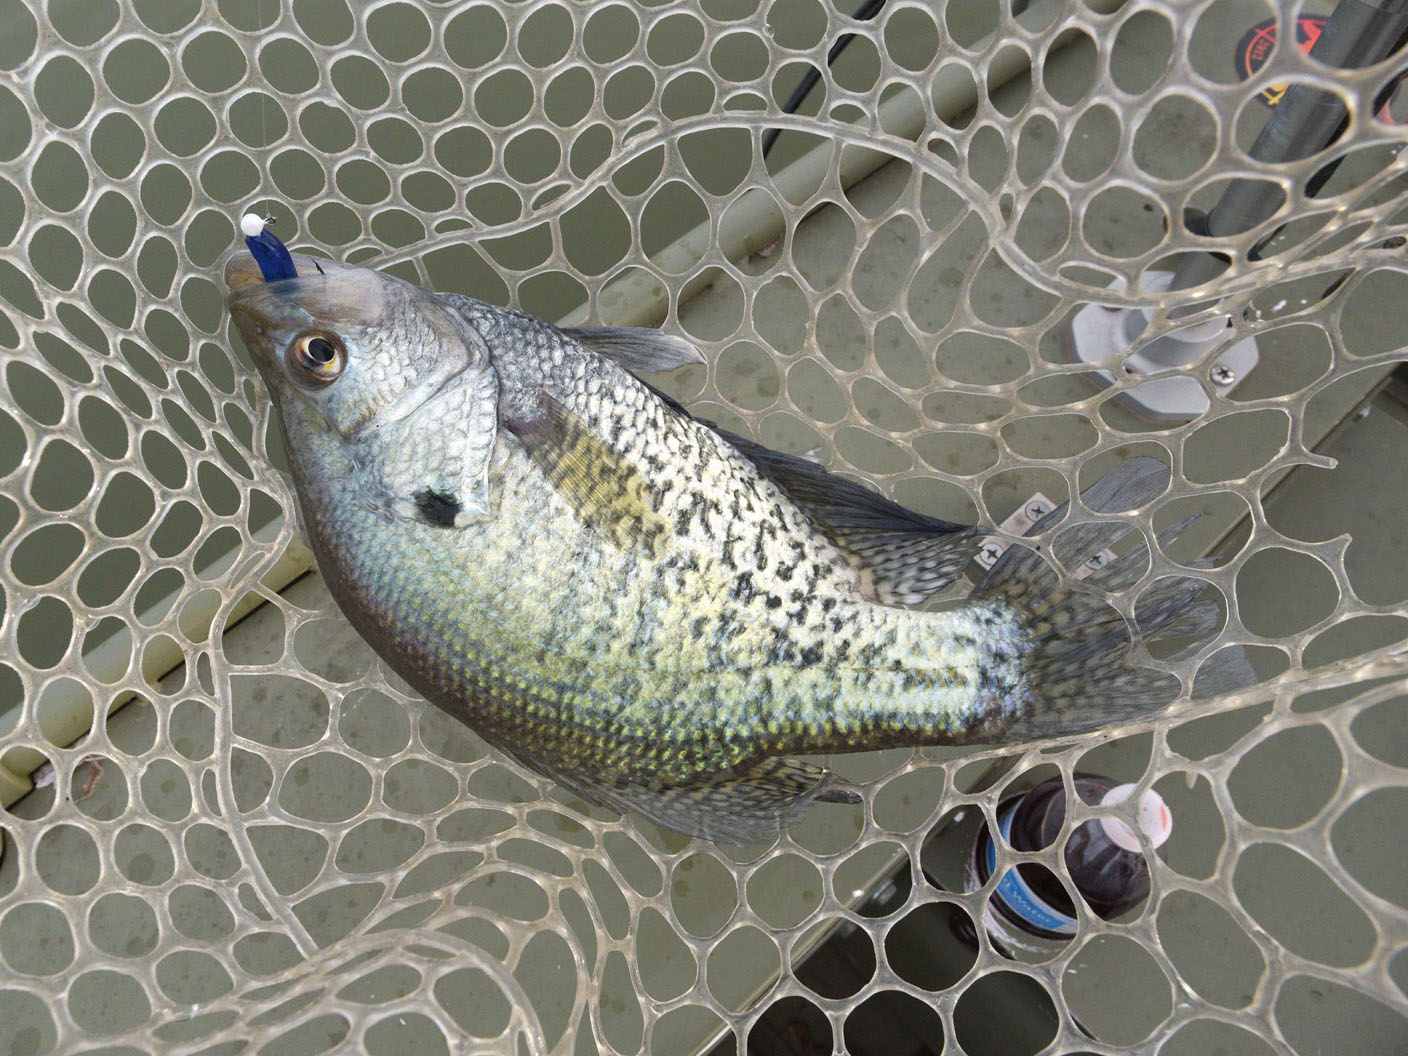 https://wehco.media.clients.ellingtoncms.com/imports/adg/photos/204093240_NW-OUT-CRAPPIE-4-18-002_ORIG.jpg